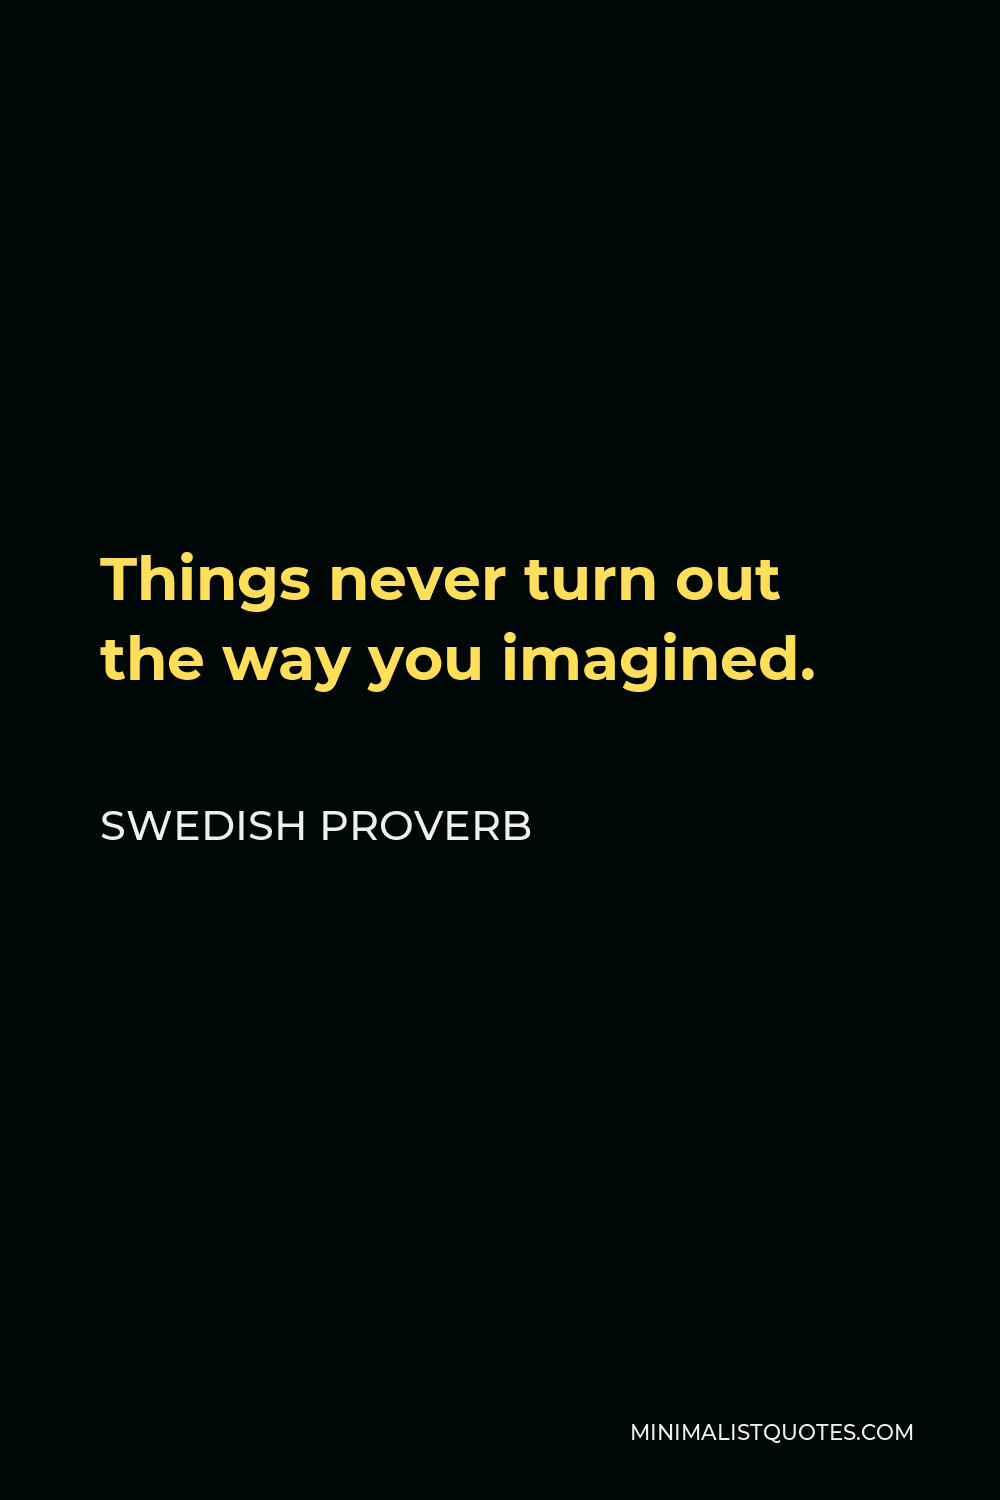 Swedish Proverb Quote - Things never turn out the way you imagined.